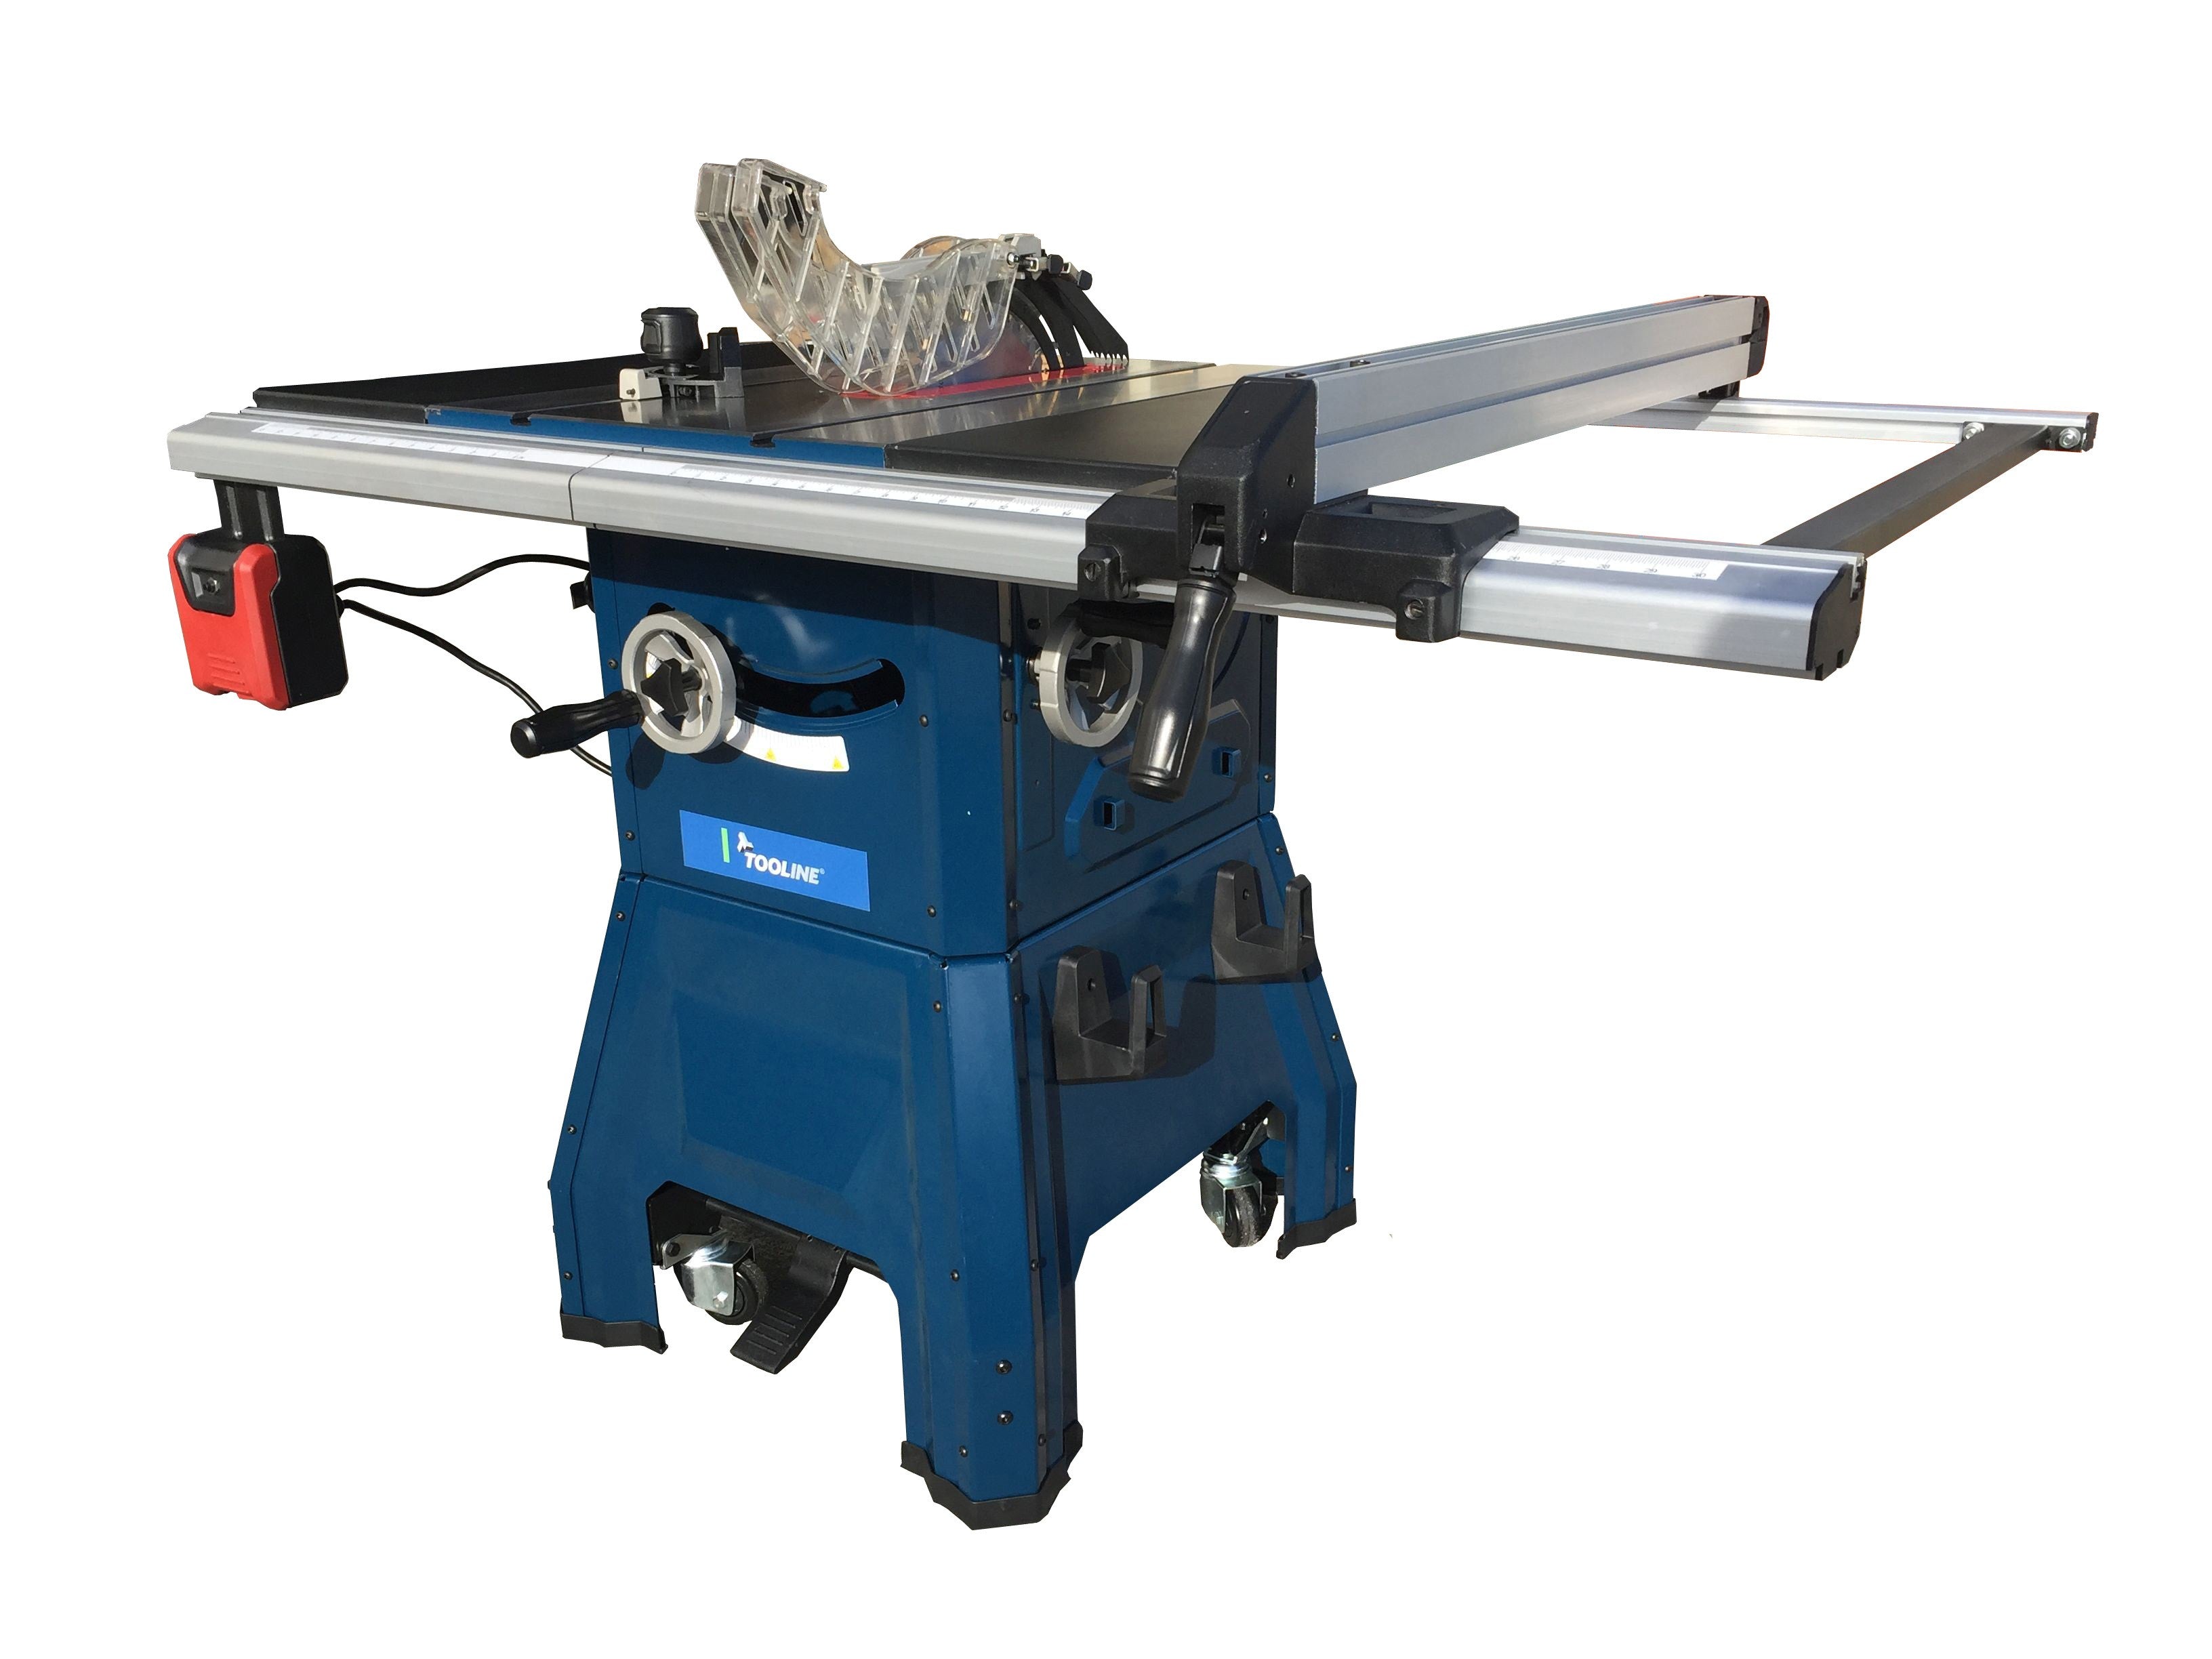 Tooline 254mm Table Saw